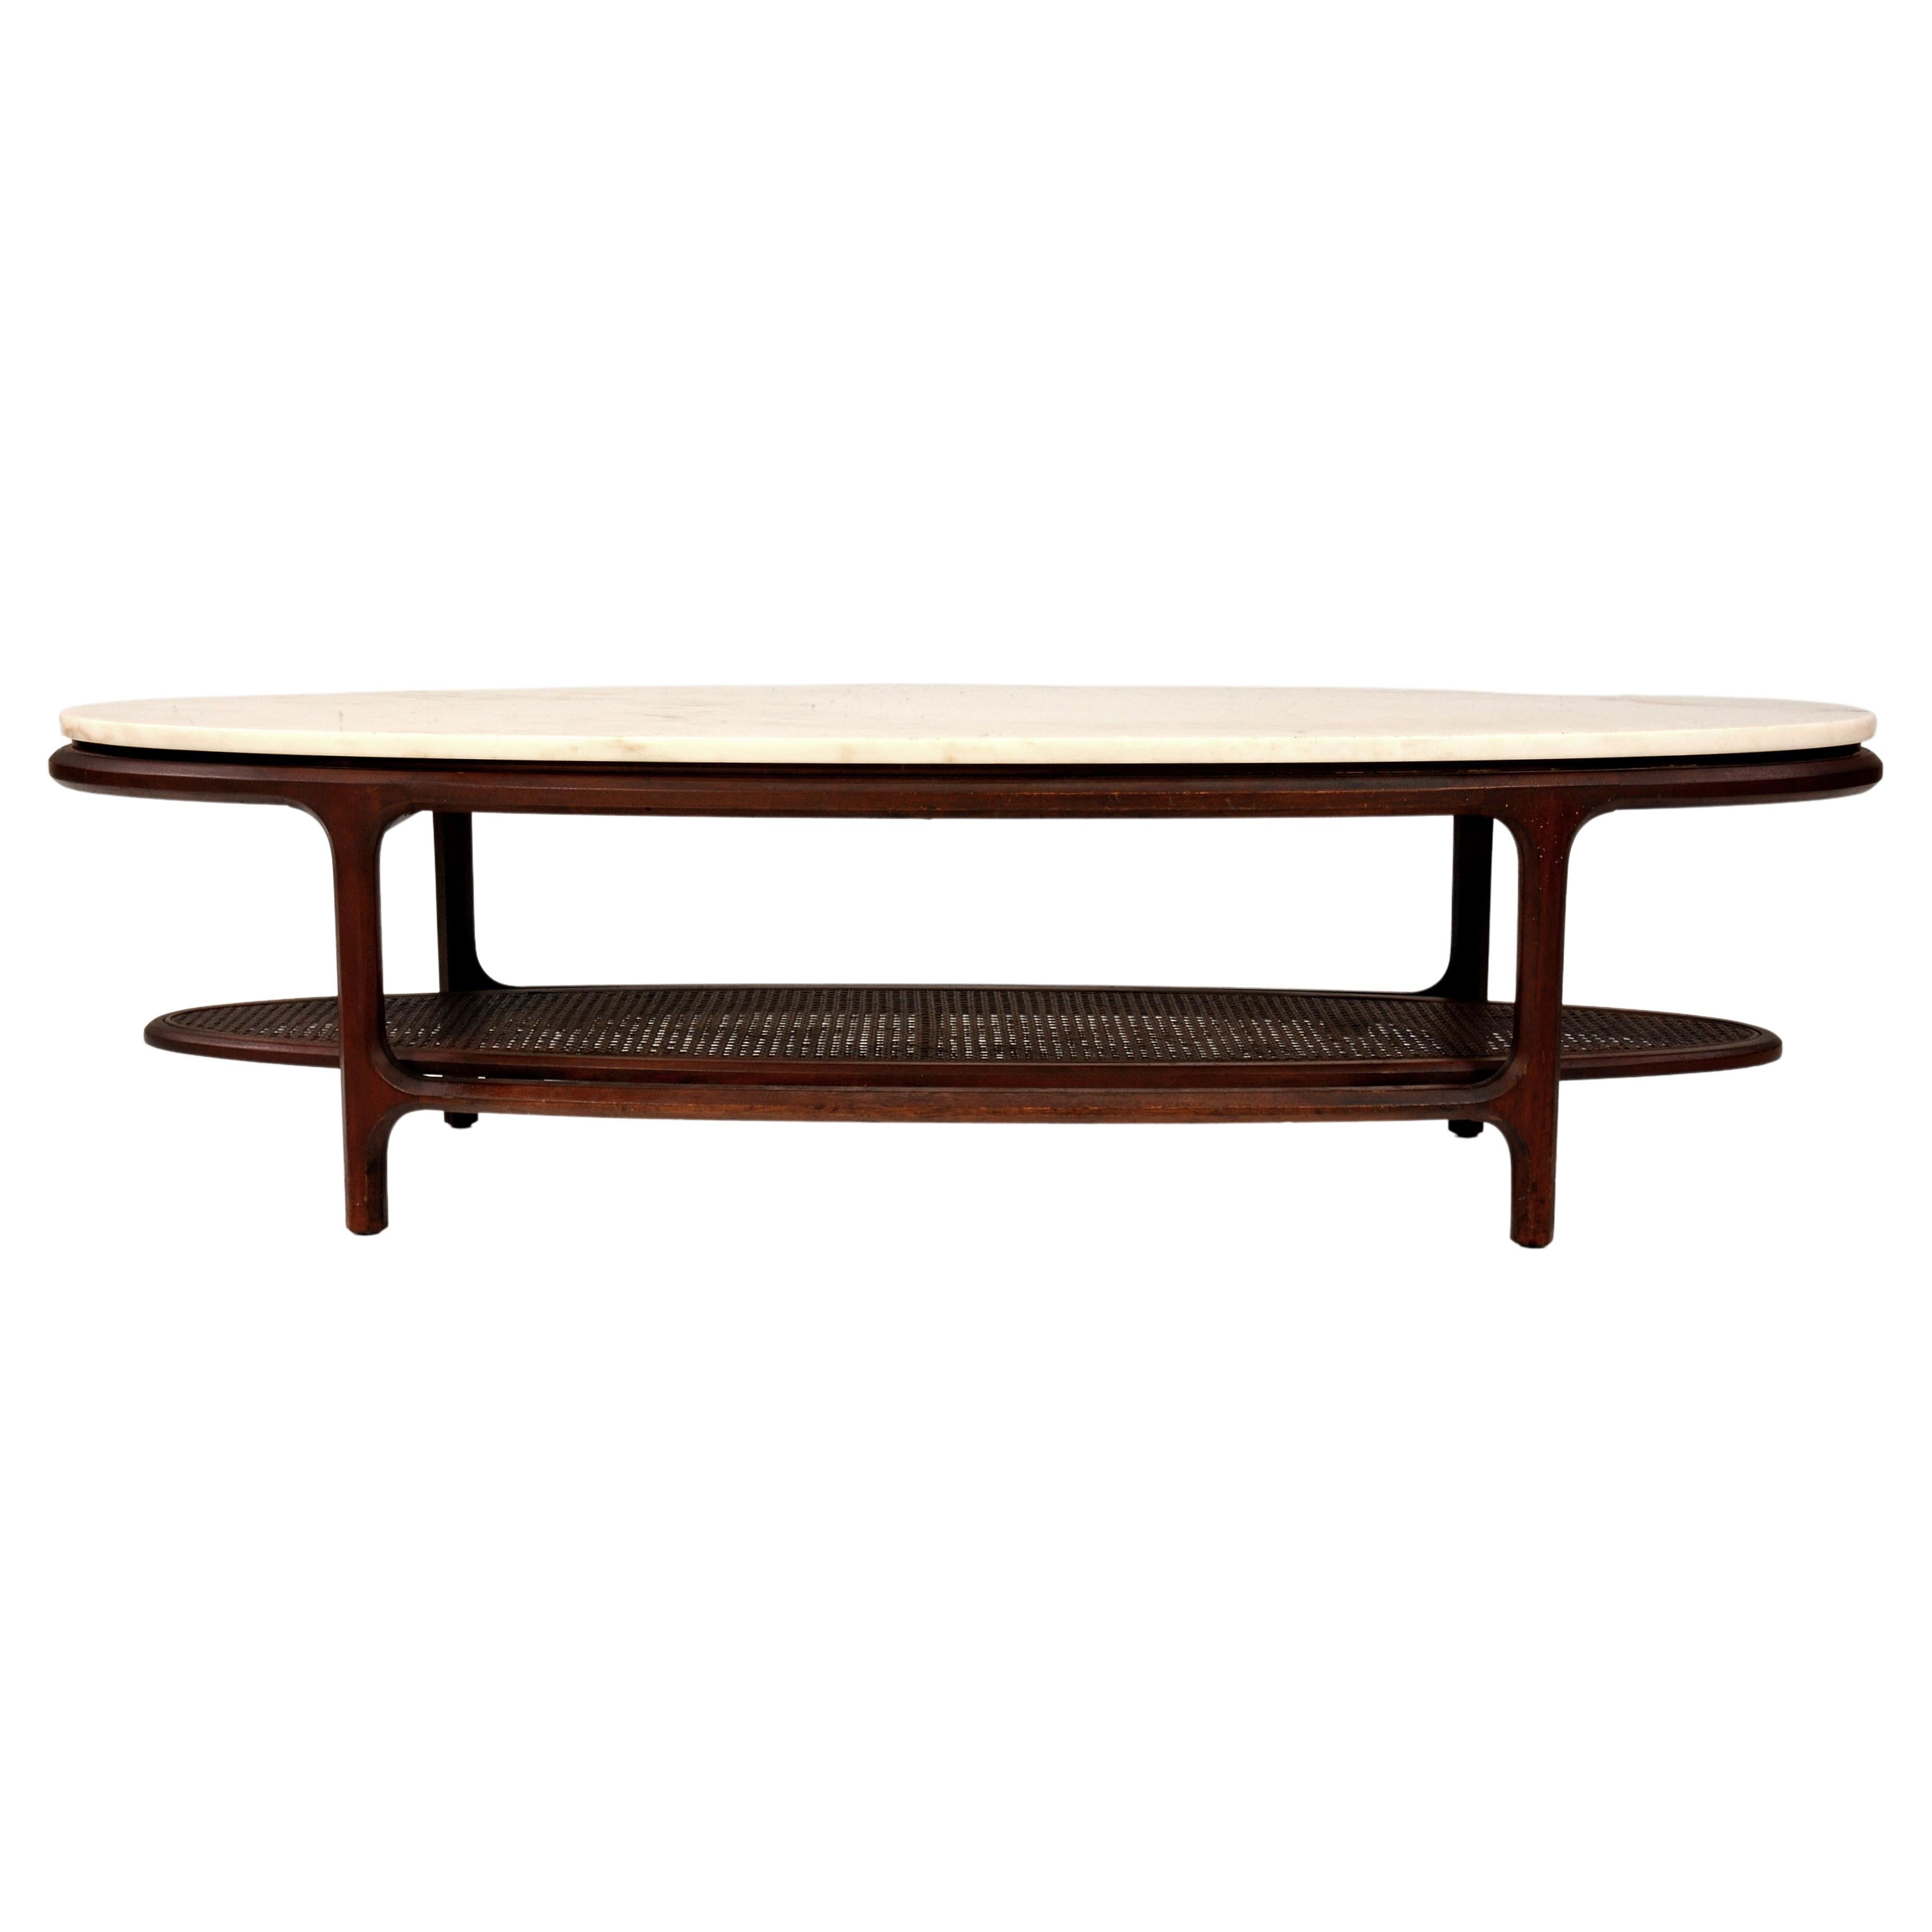 American Mid-Century White Marble, Walnut and Cane Surfboard Coffee Table